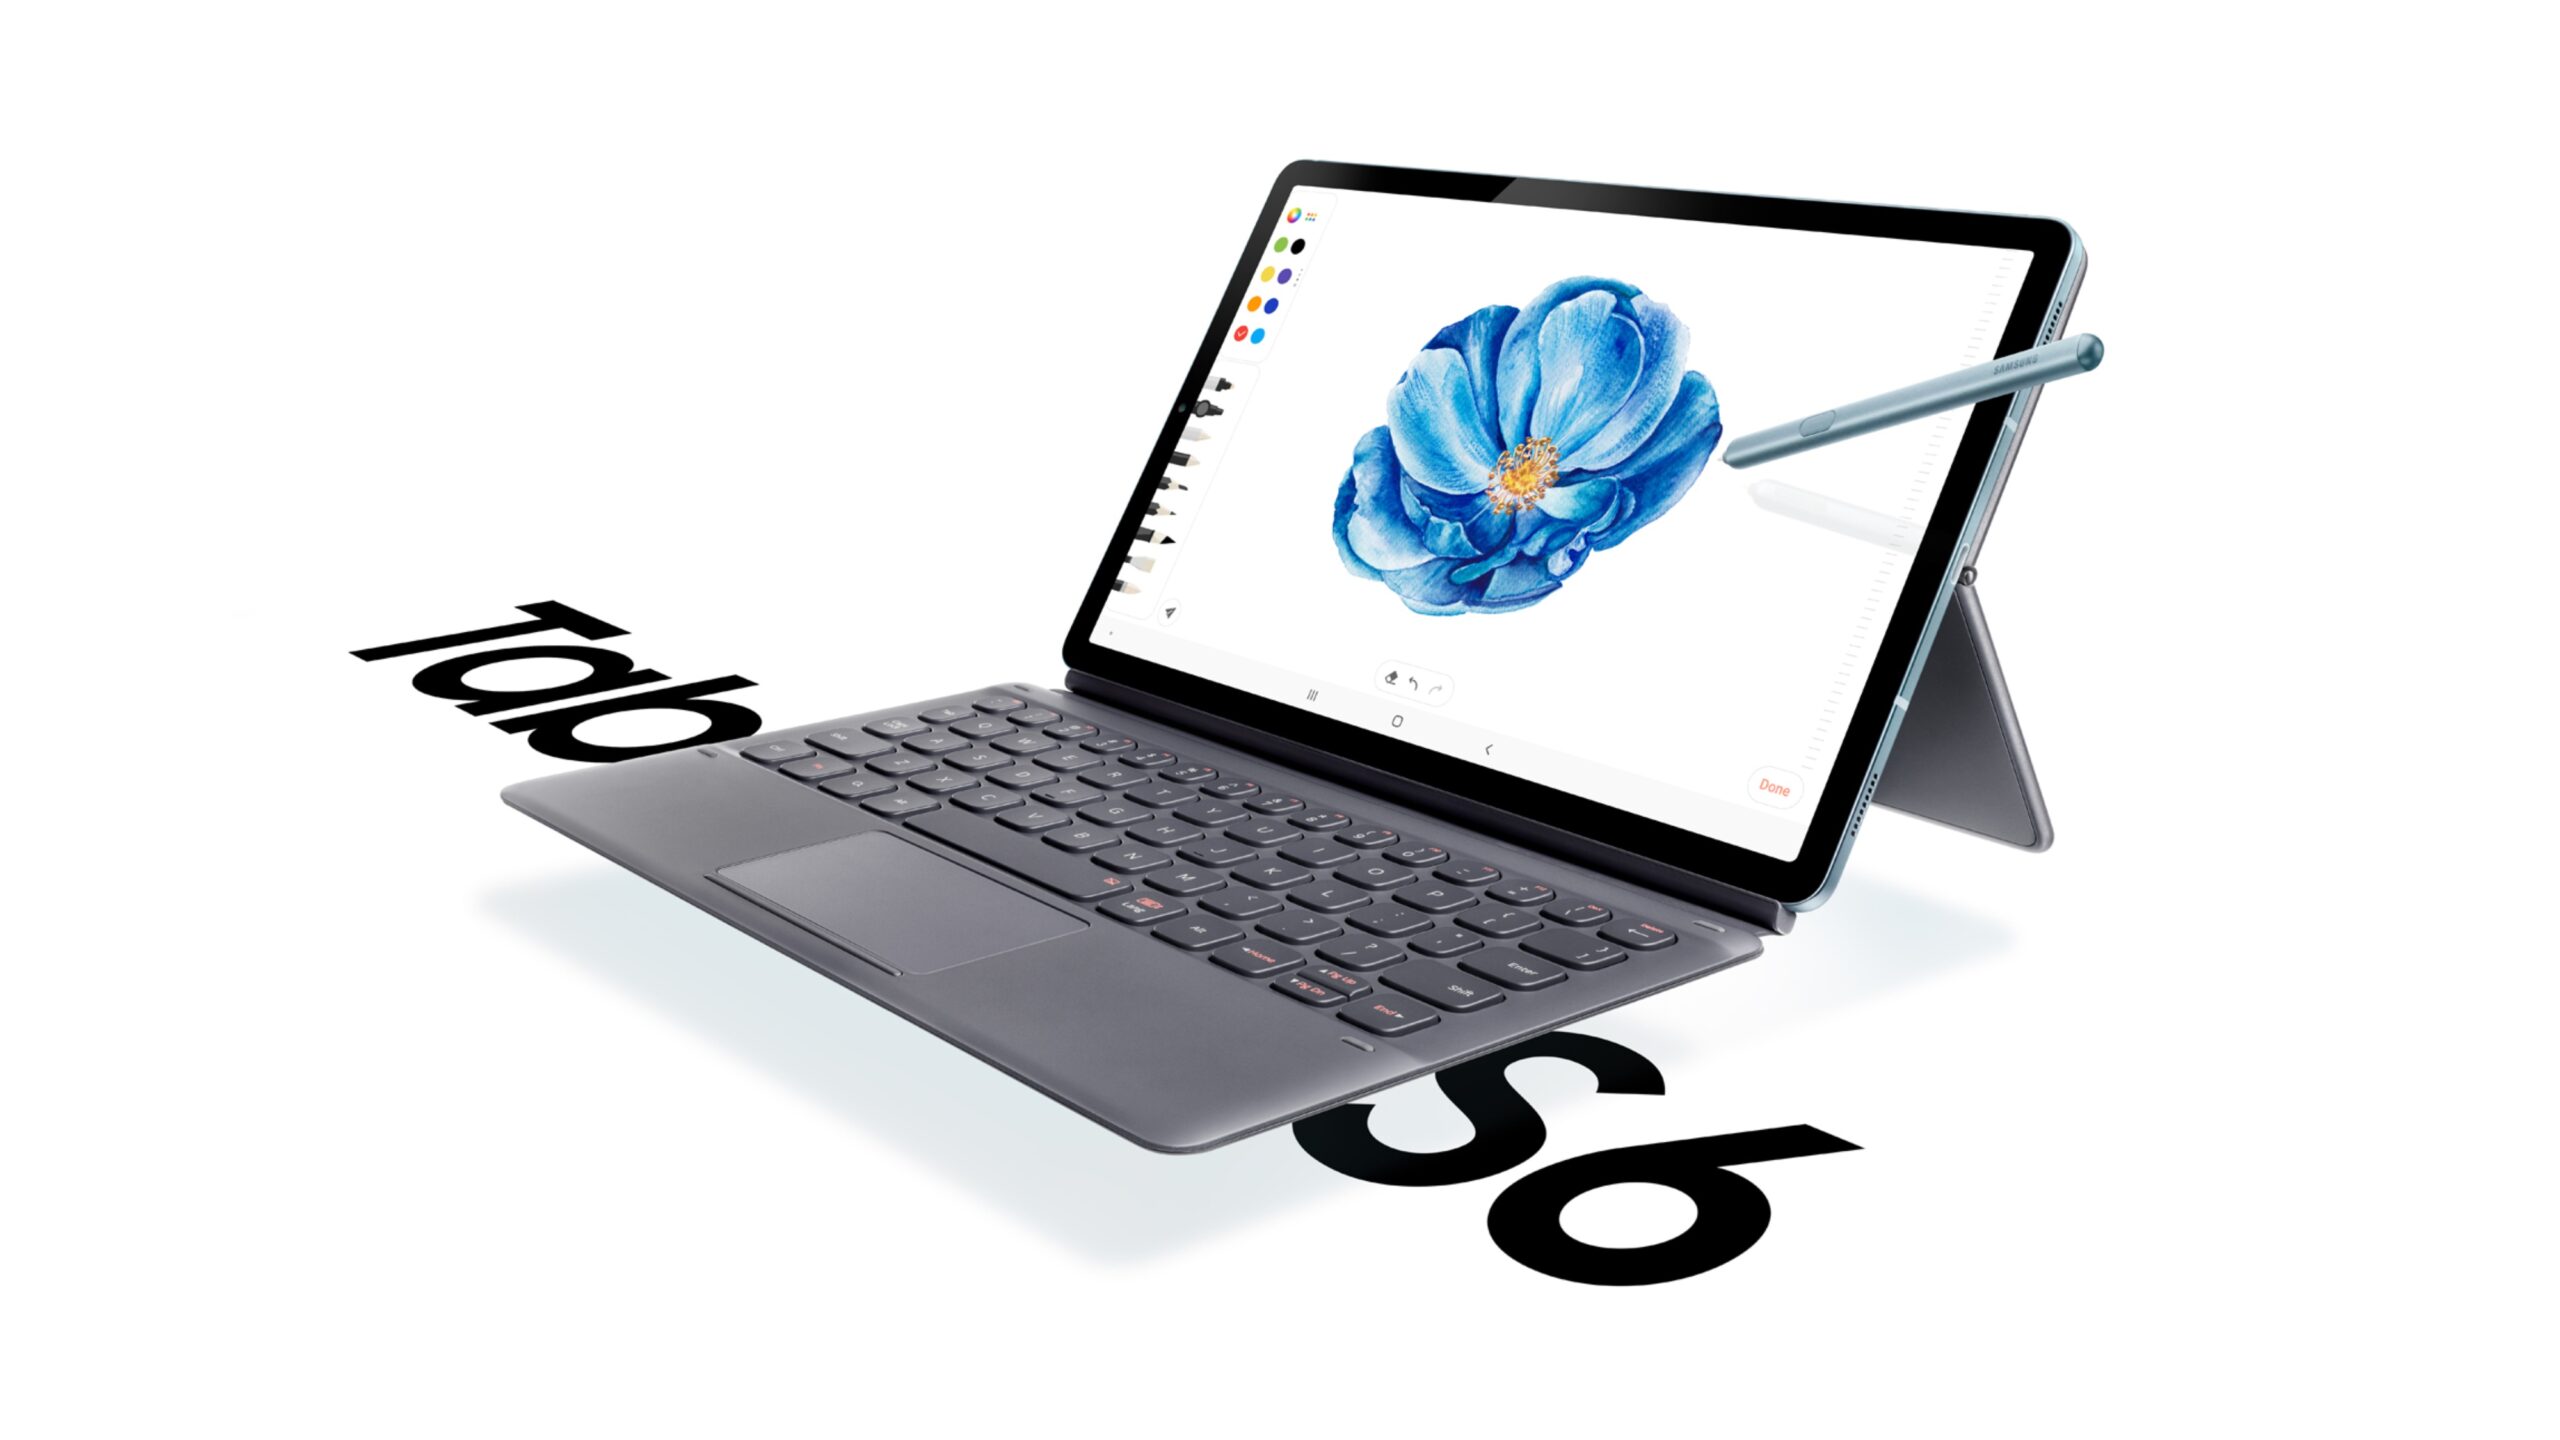 Samsung Galaxy Tab S6 gets a direct update to One UI 3.1 from One UI 2.5